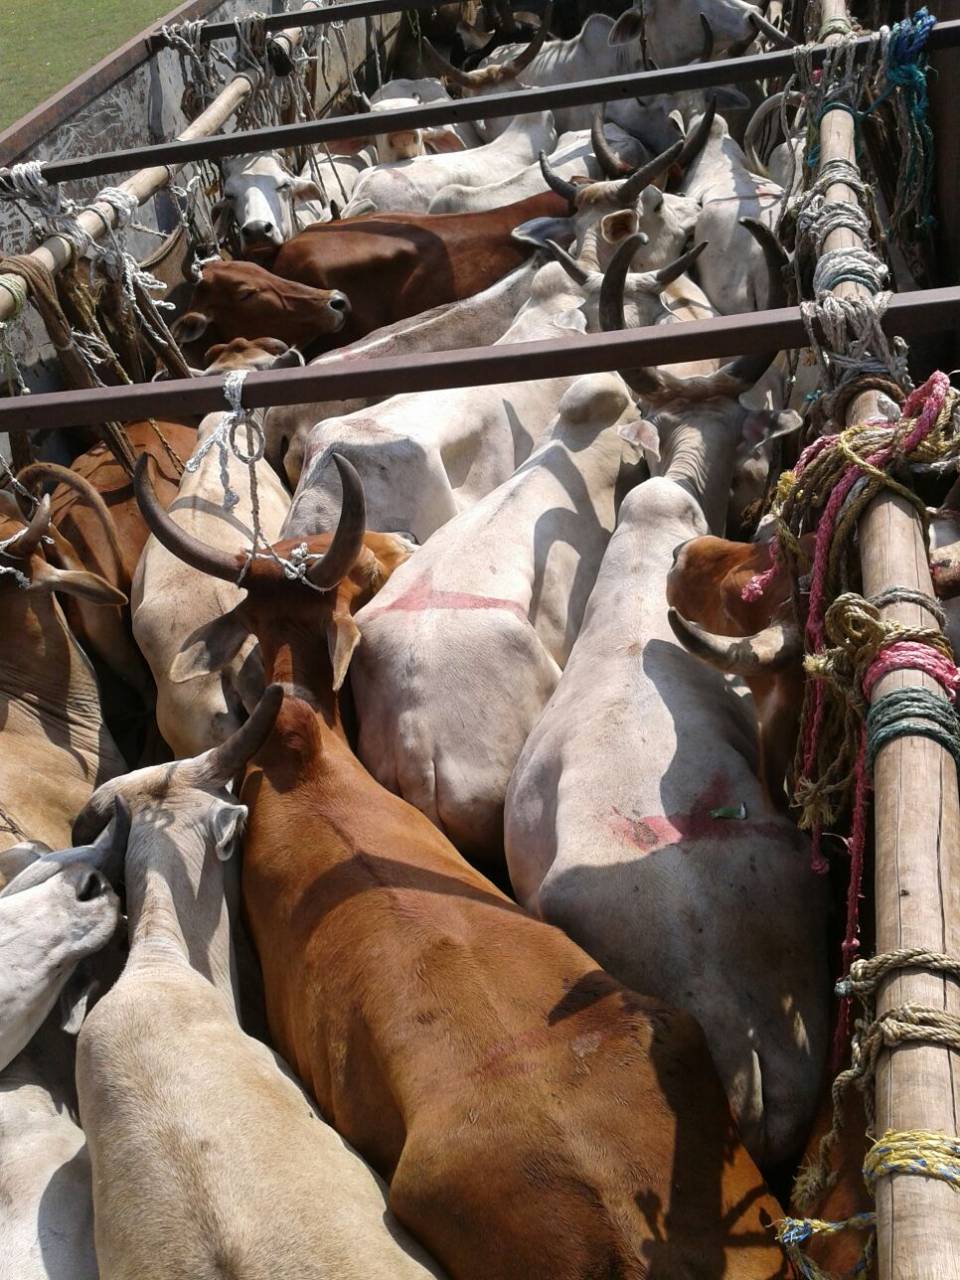 Horrific crimes against cattle : A truck stuffed with them